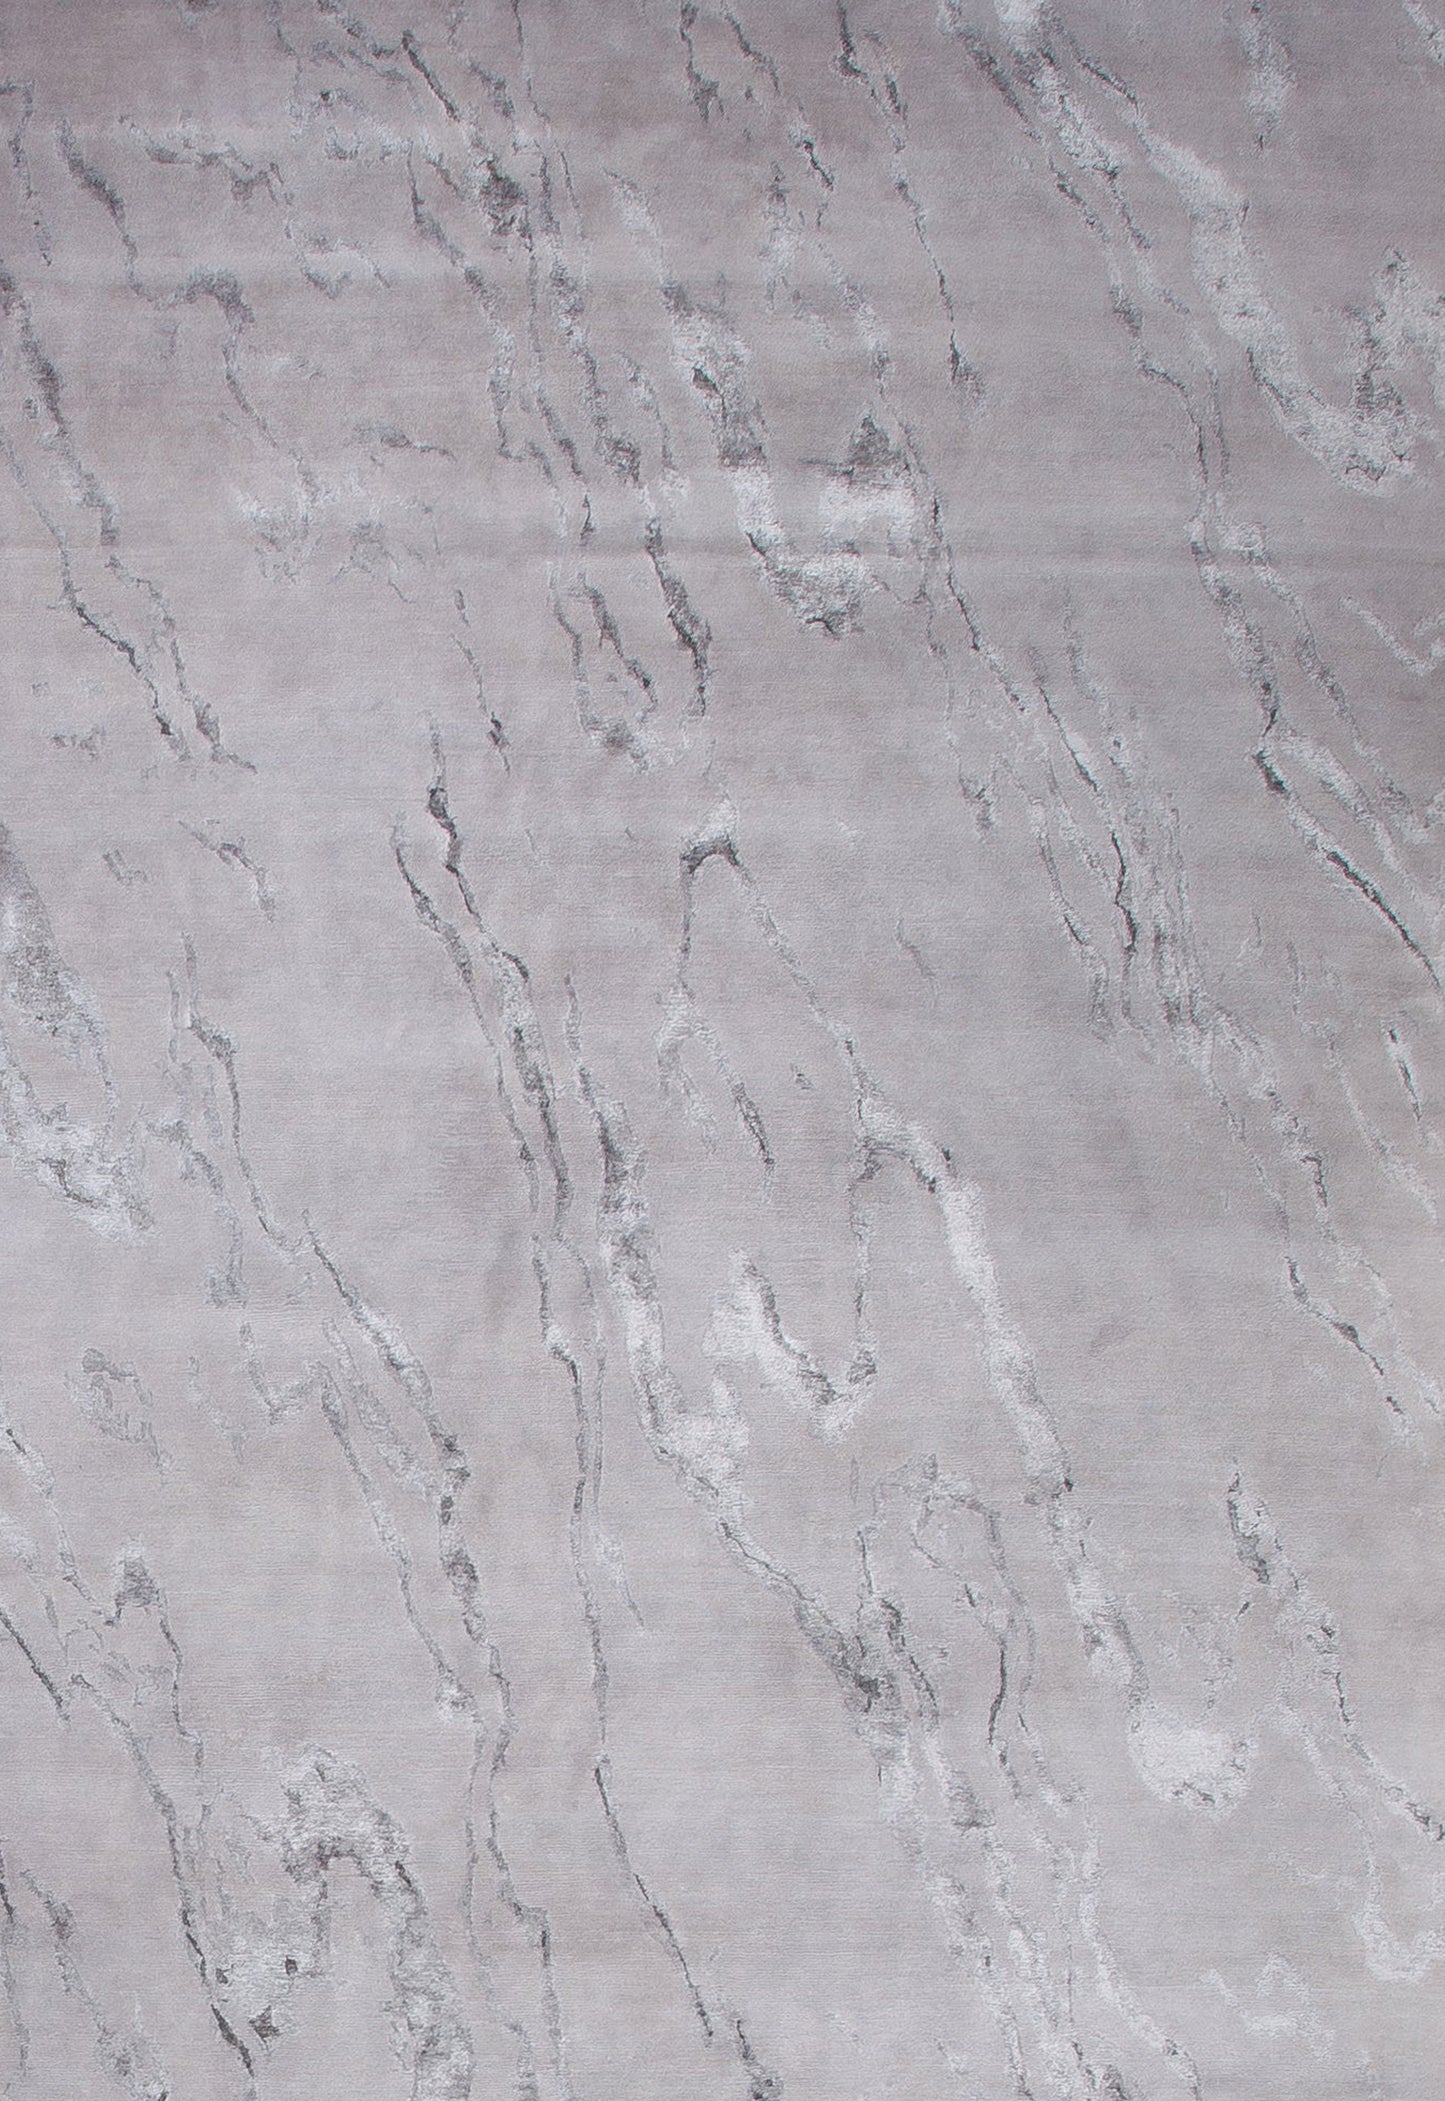 on the top right corner the marble marks display in white and in a darker gray.